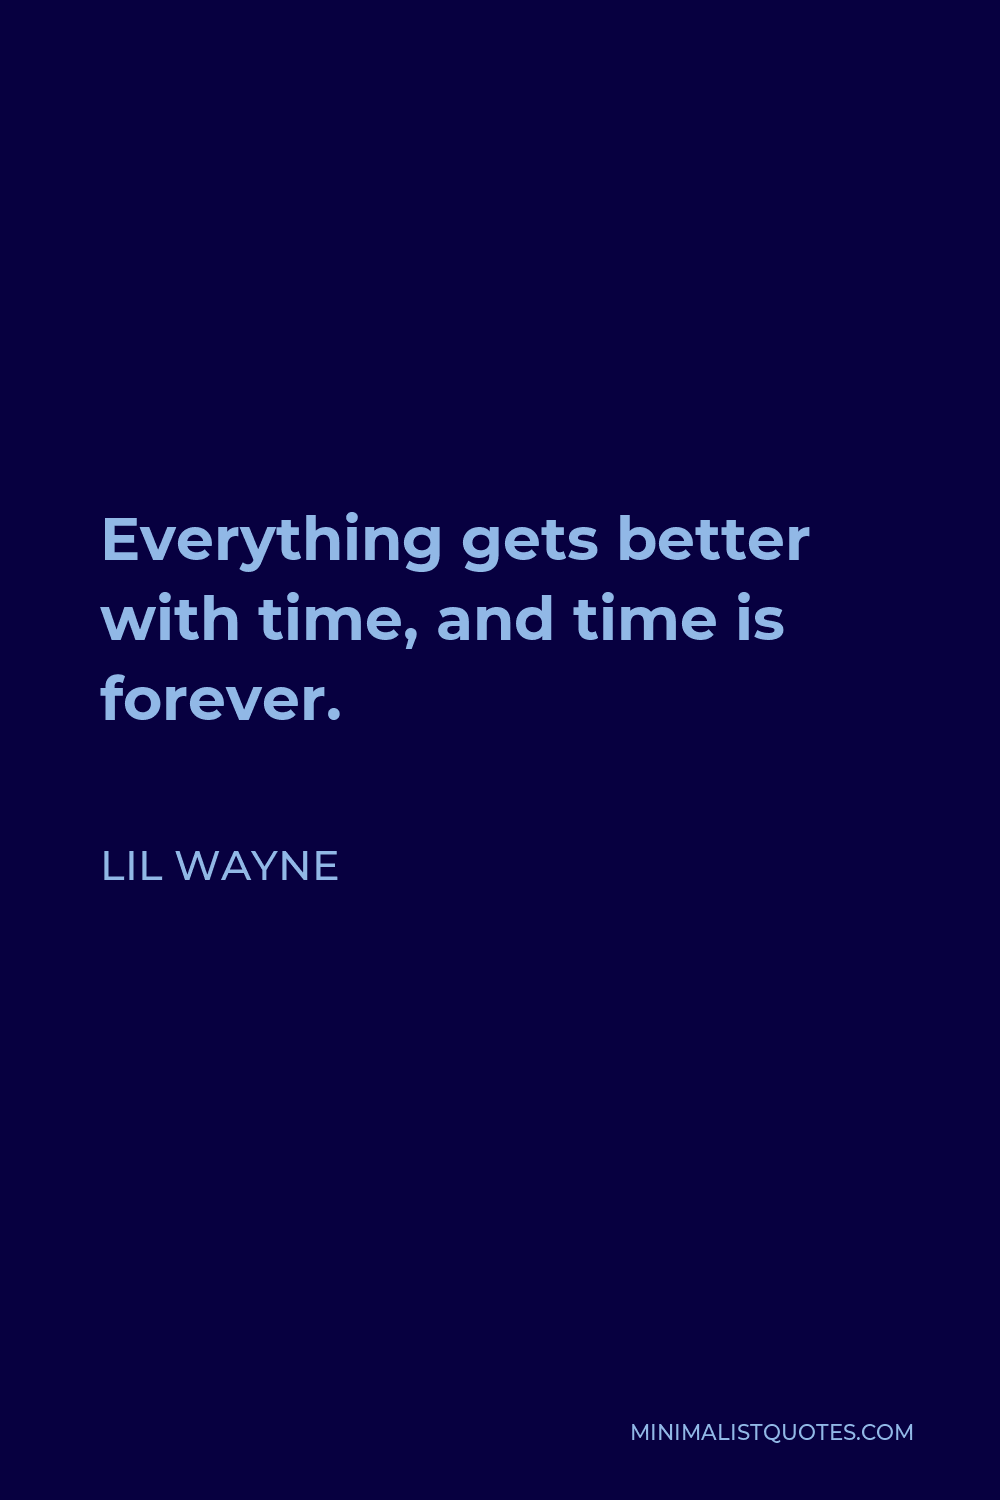 Lil Wayne Quote - Everything gets better with time, and time is forever.